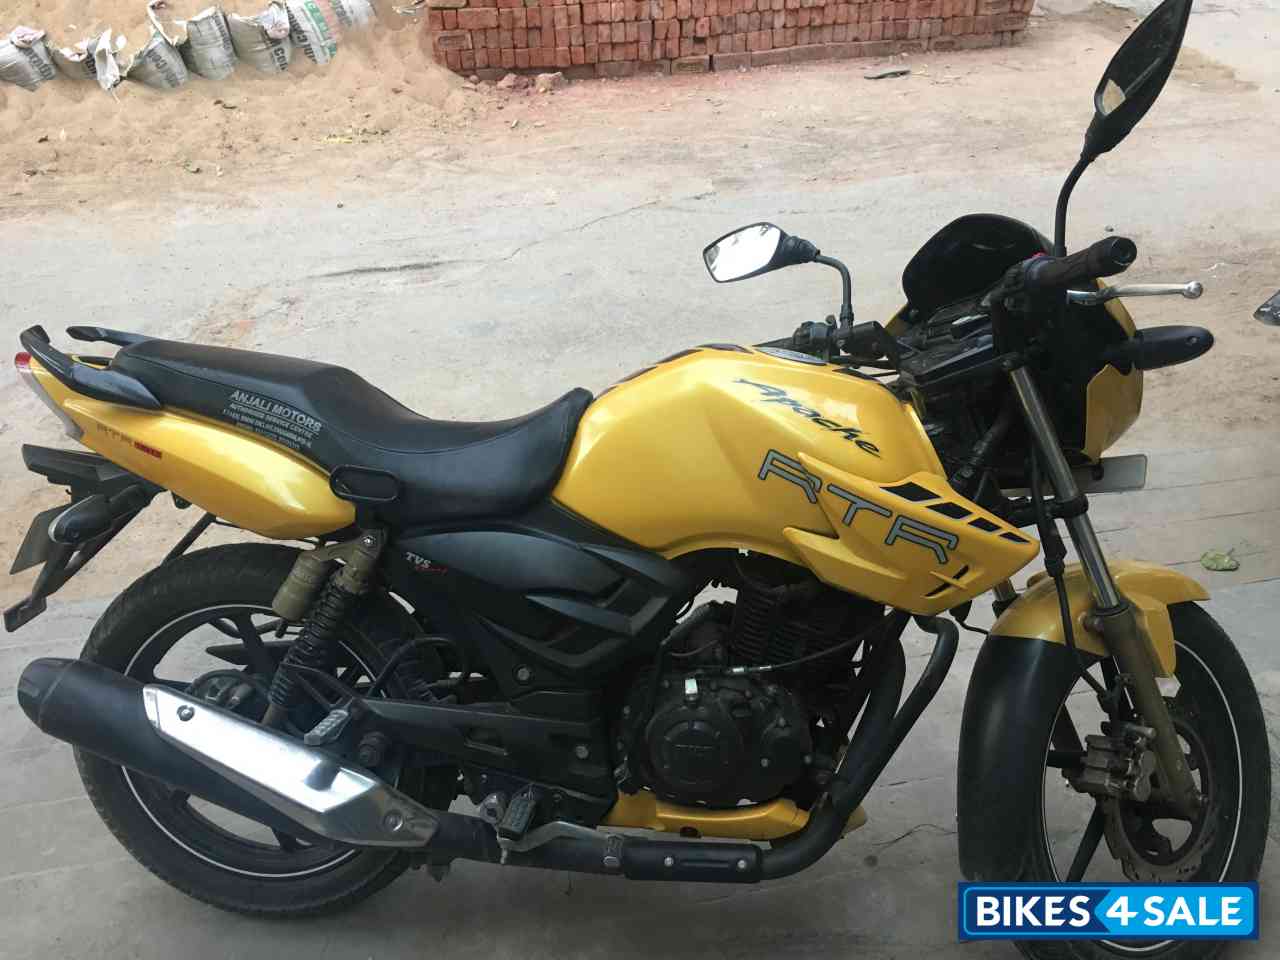 Used 2012 Model Tvs Apache Rtr 180 For Sale In Hyderabad Id 167051 Yellow Colour Bikes4sale